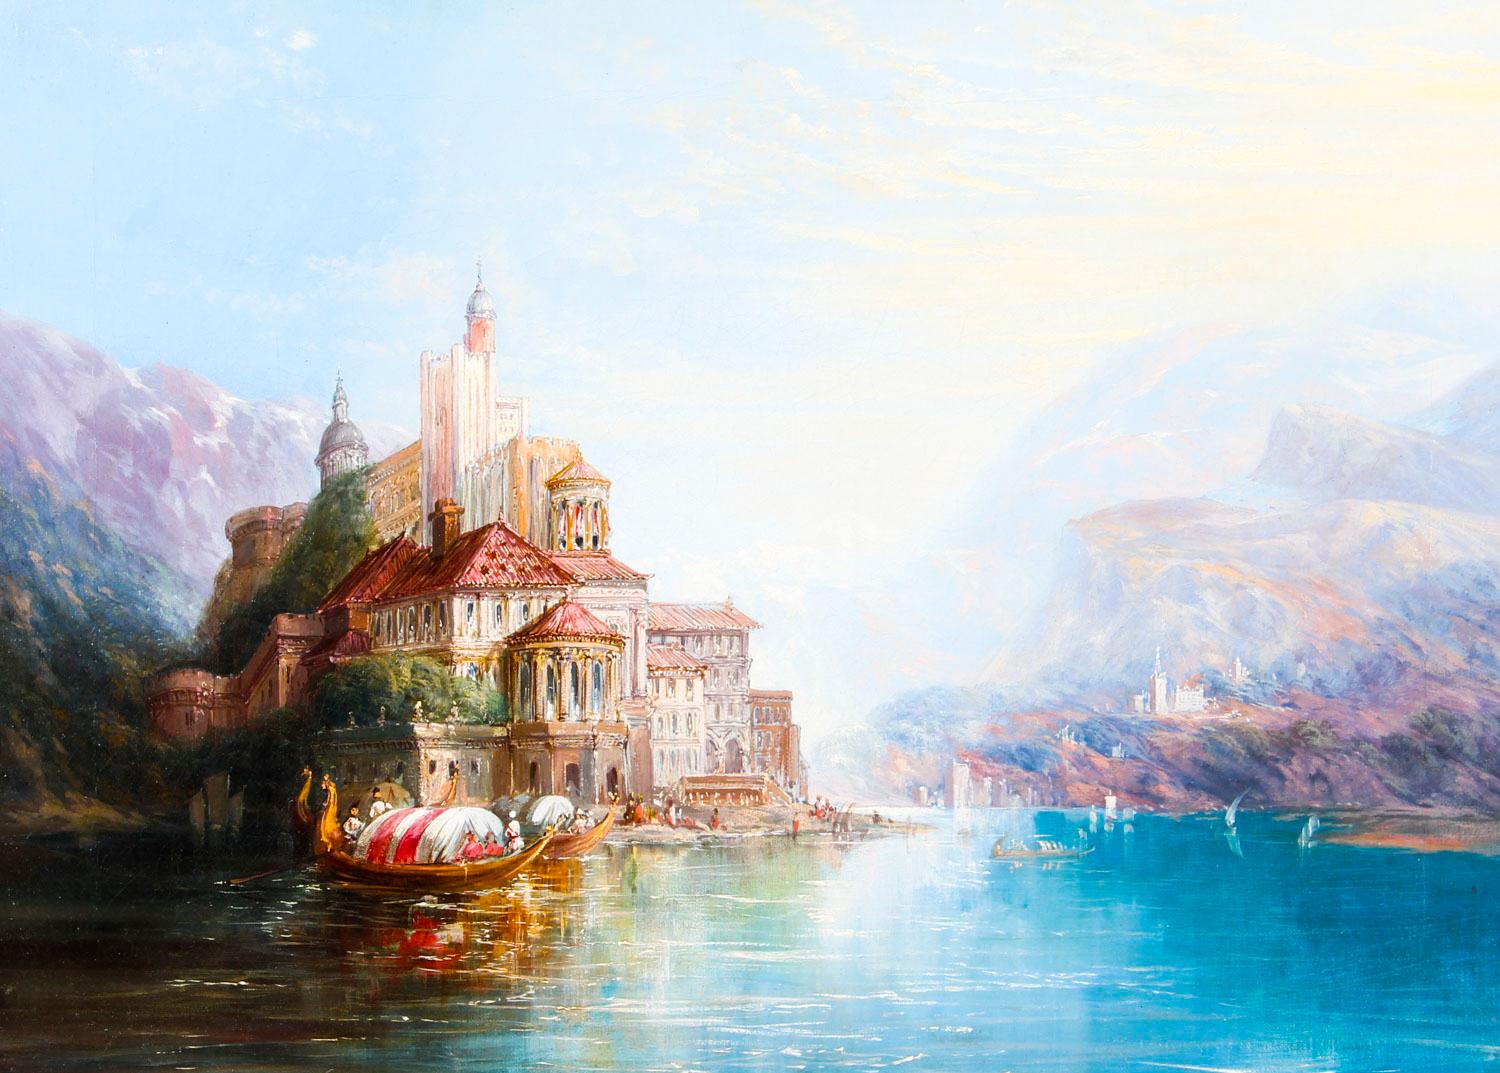 This is a truly splendid antique oil on canvas painting featuring a continental mountainous lakeside scene with a palace, by a follower of the celebrated British artist Alfred Pollentine (1836-1890), and dating from the last quarter of the 19th